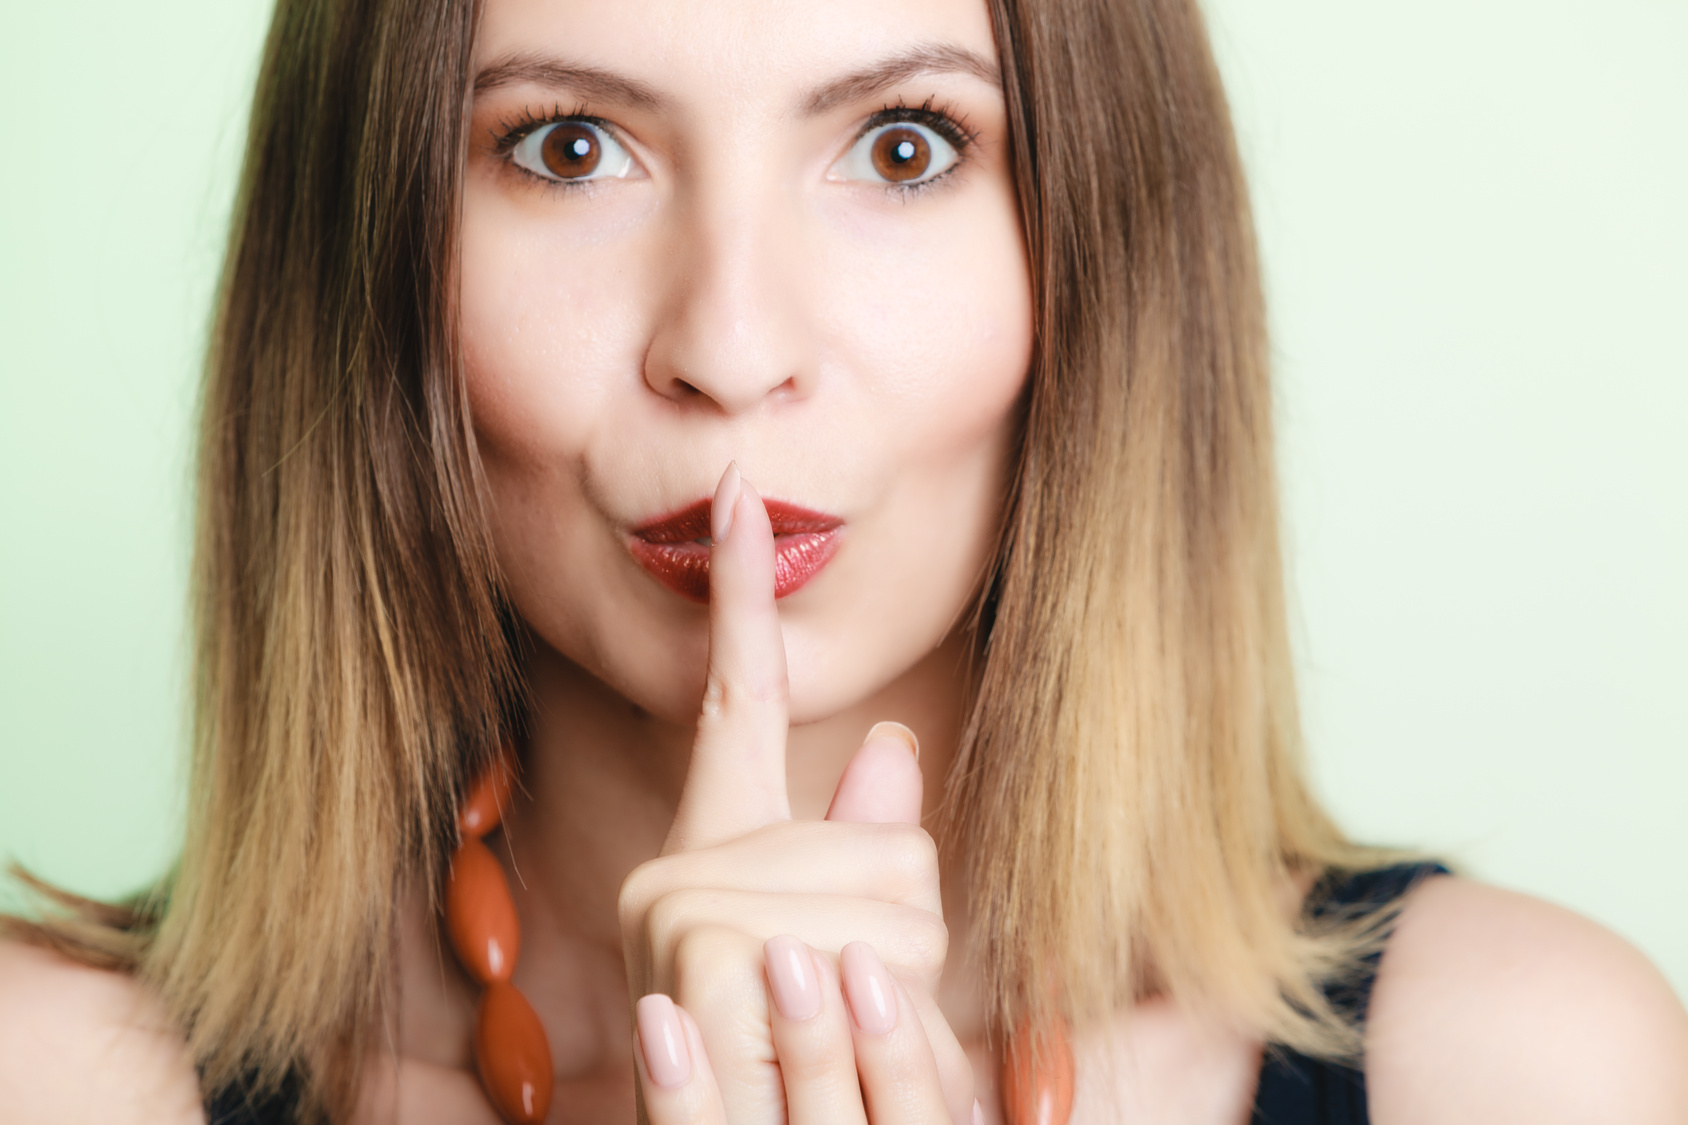 Woman asking for silence with finger on lips secret